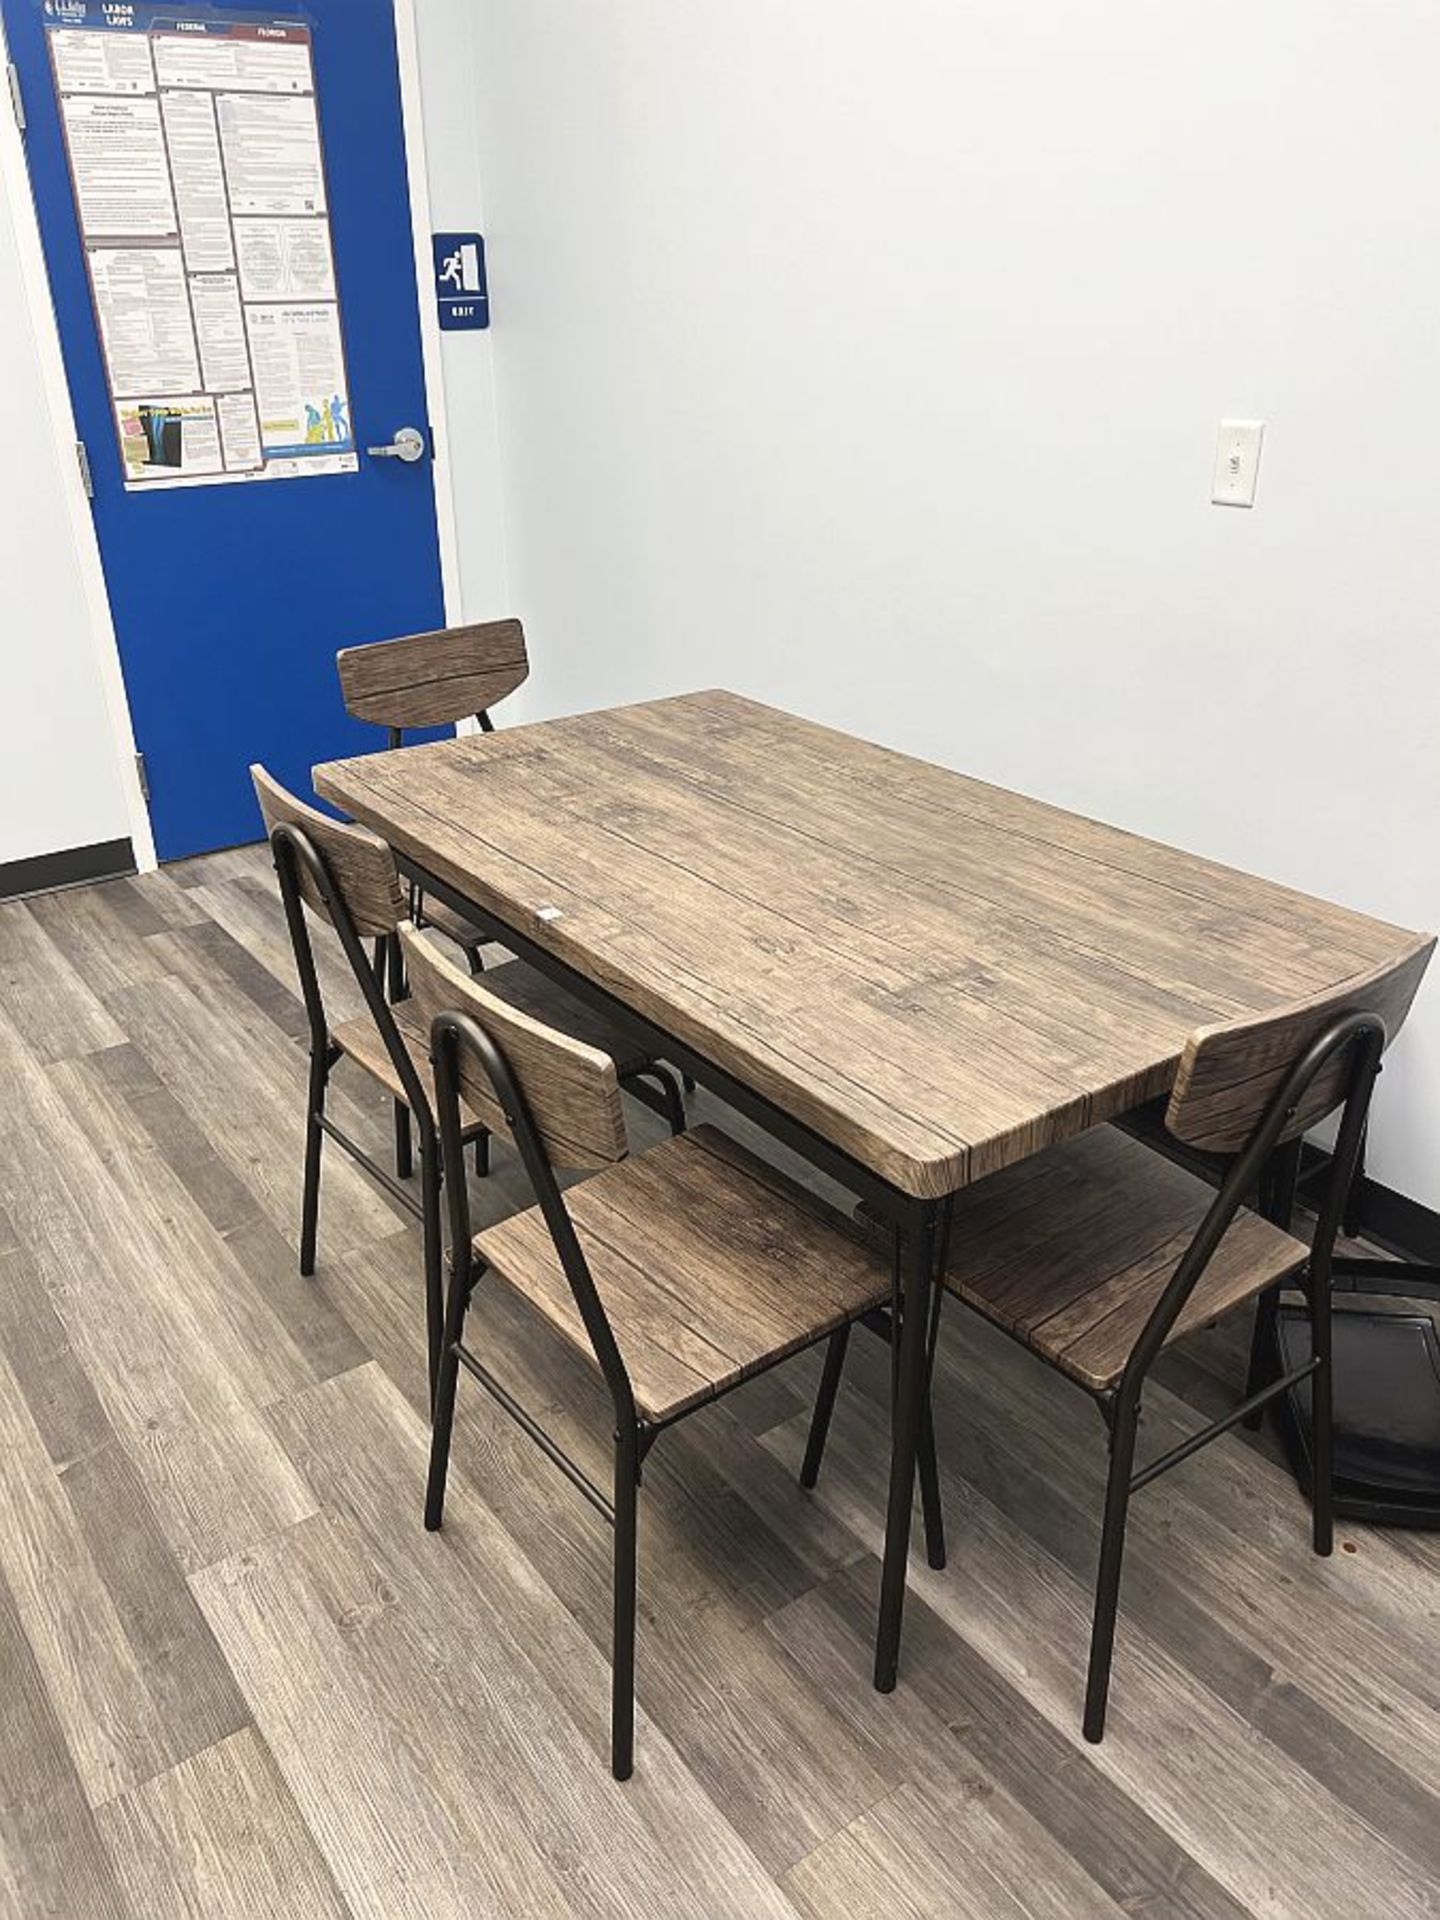 Breakroom Table w/ Bench & 4 Chairs